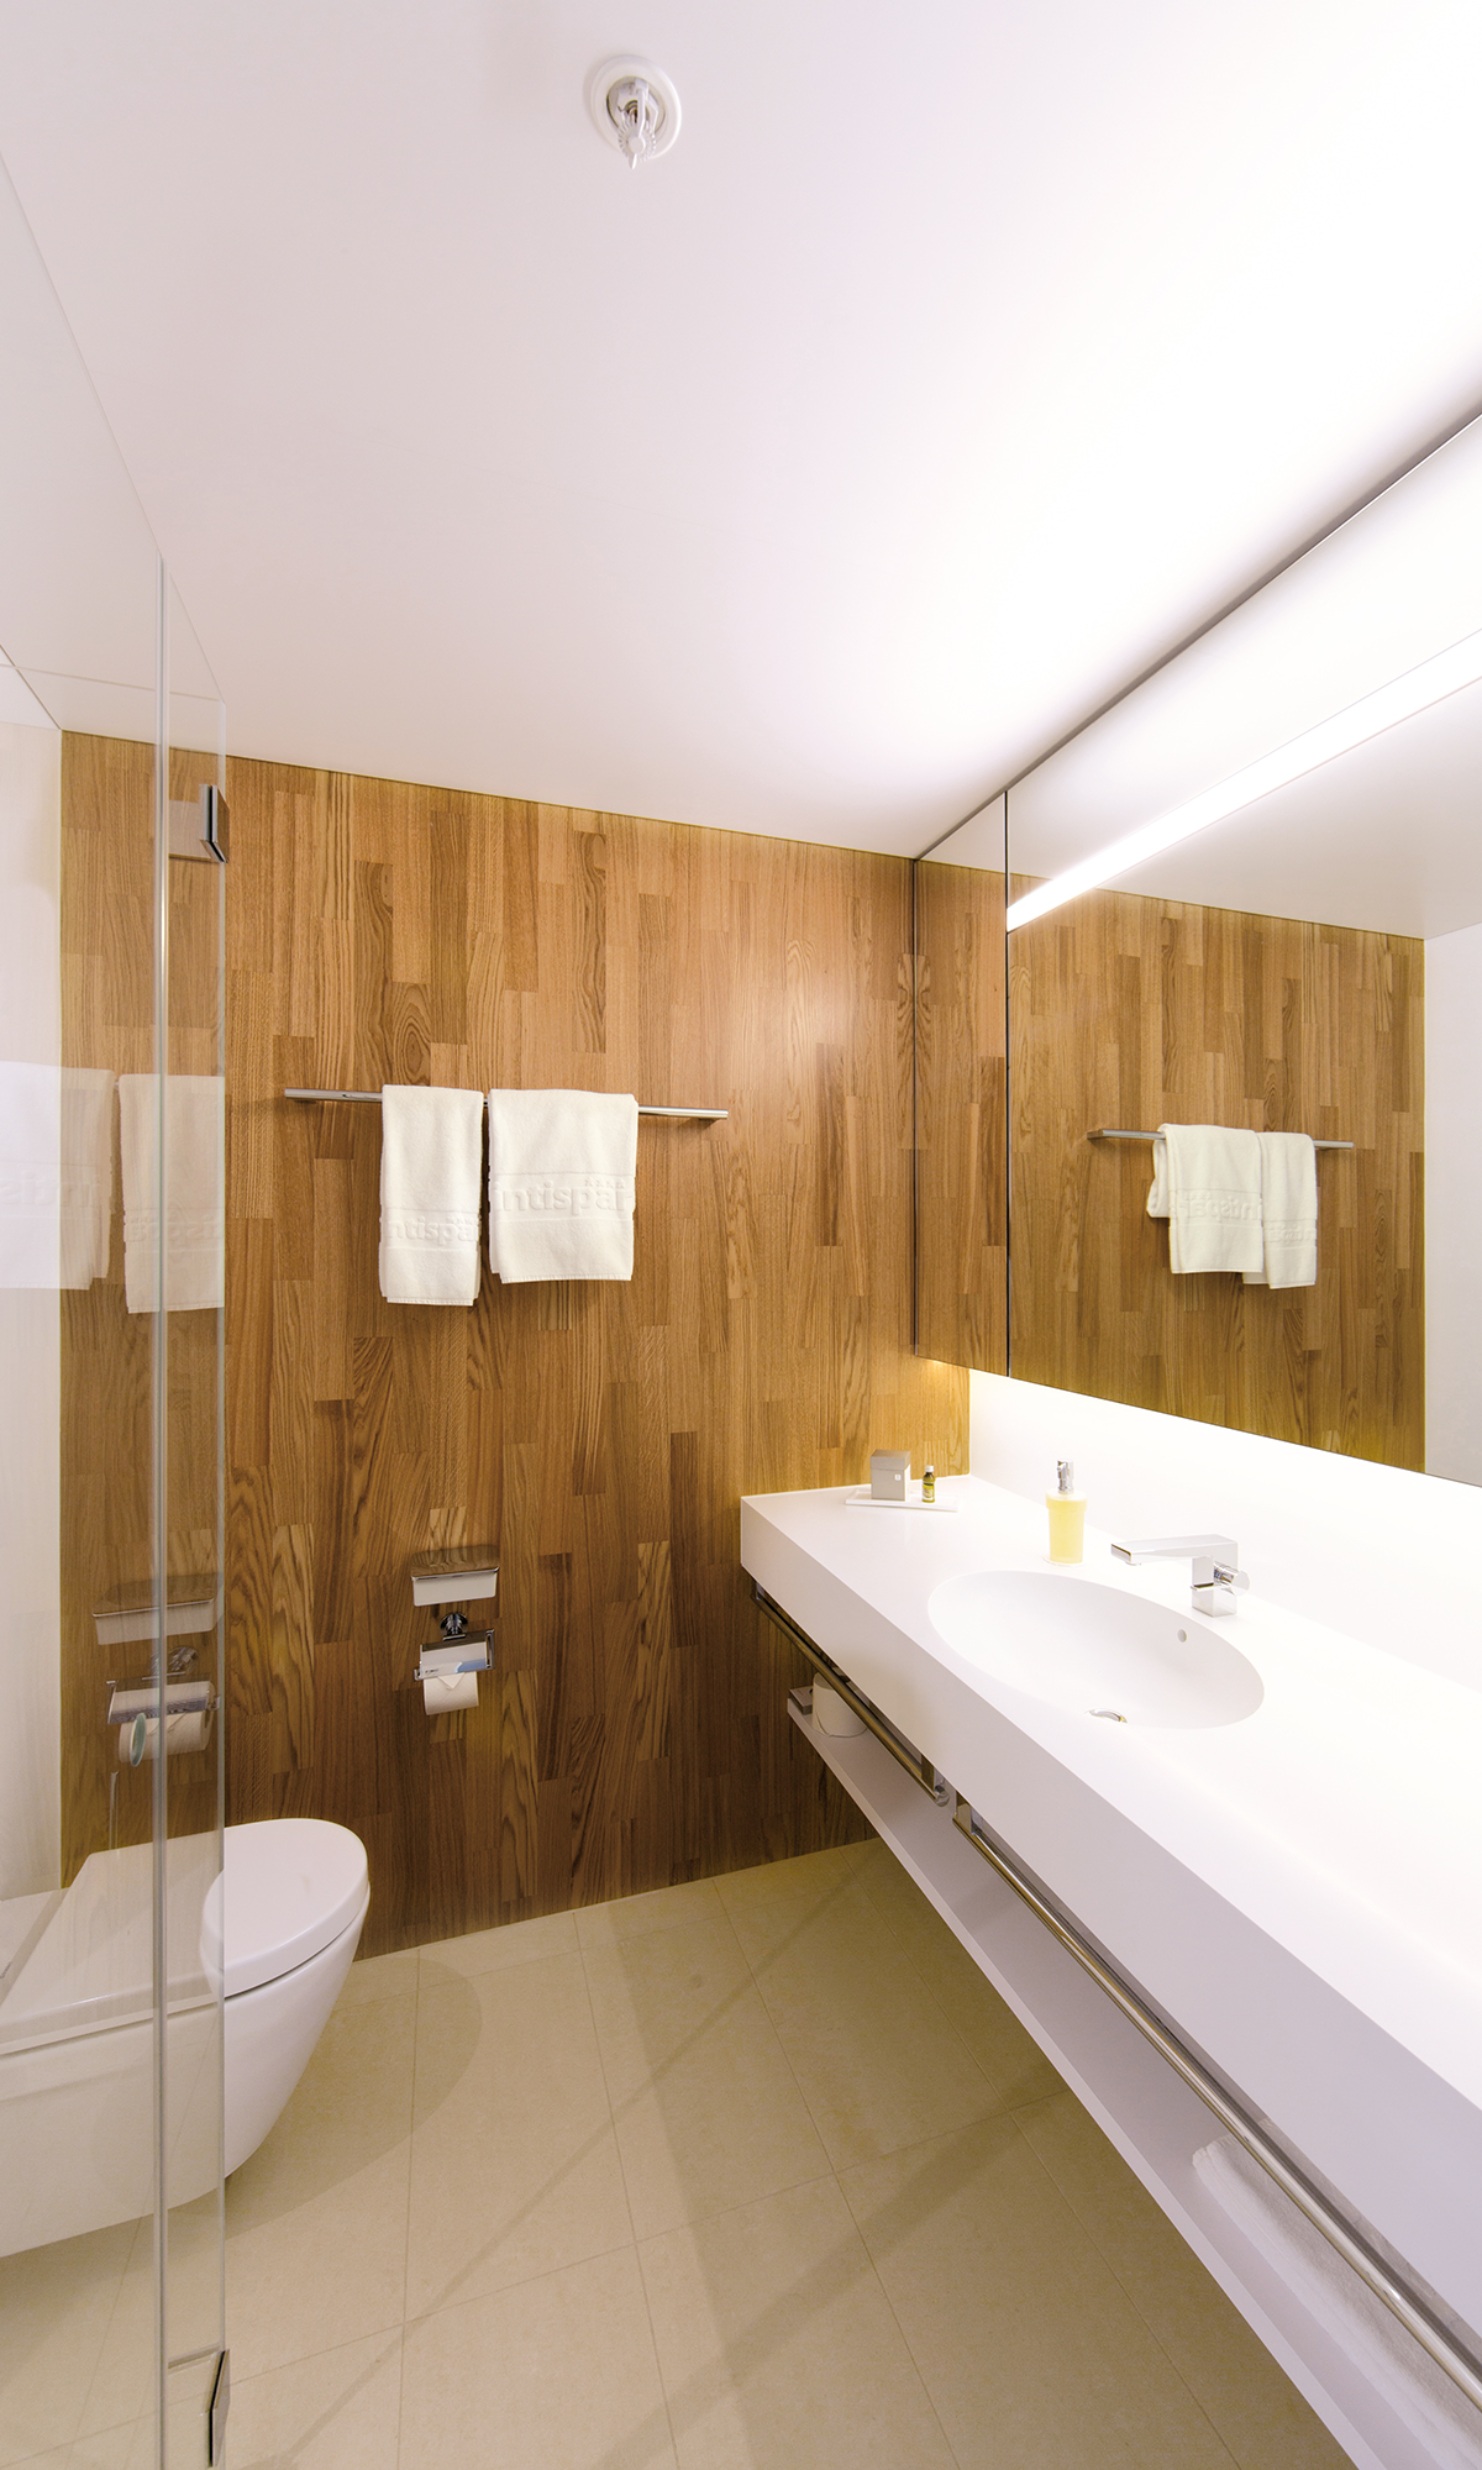 Bathroom in a hotel room of the Hotel Säntispark with a wooden wall, glazed shower and light furnishings